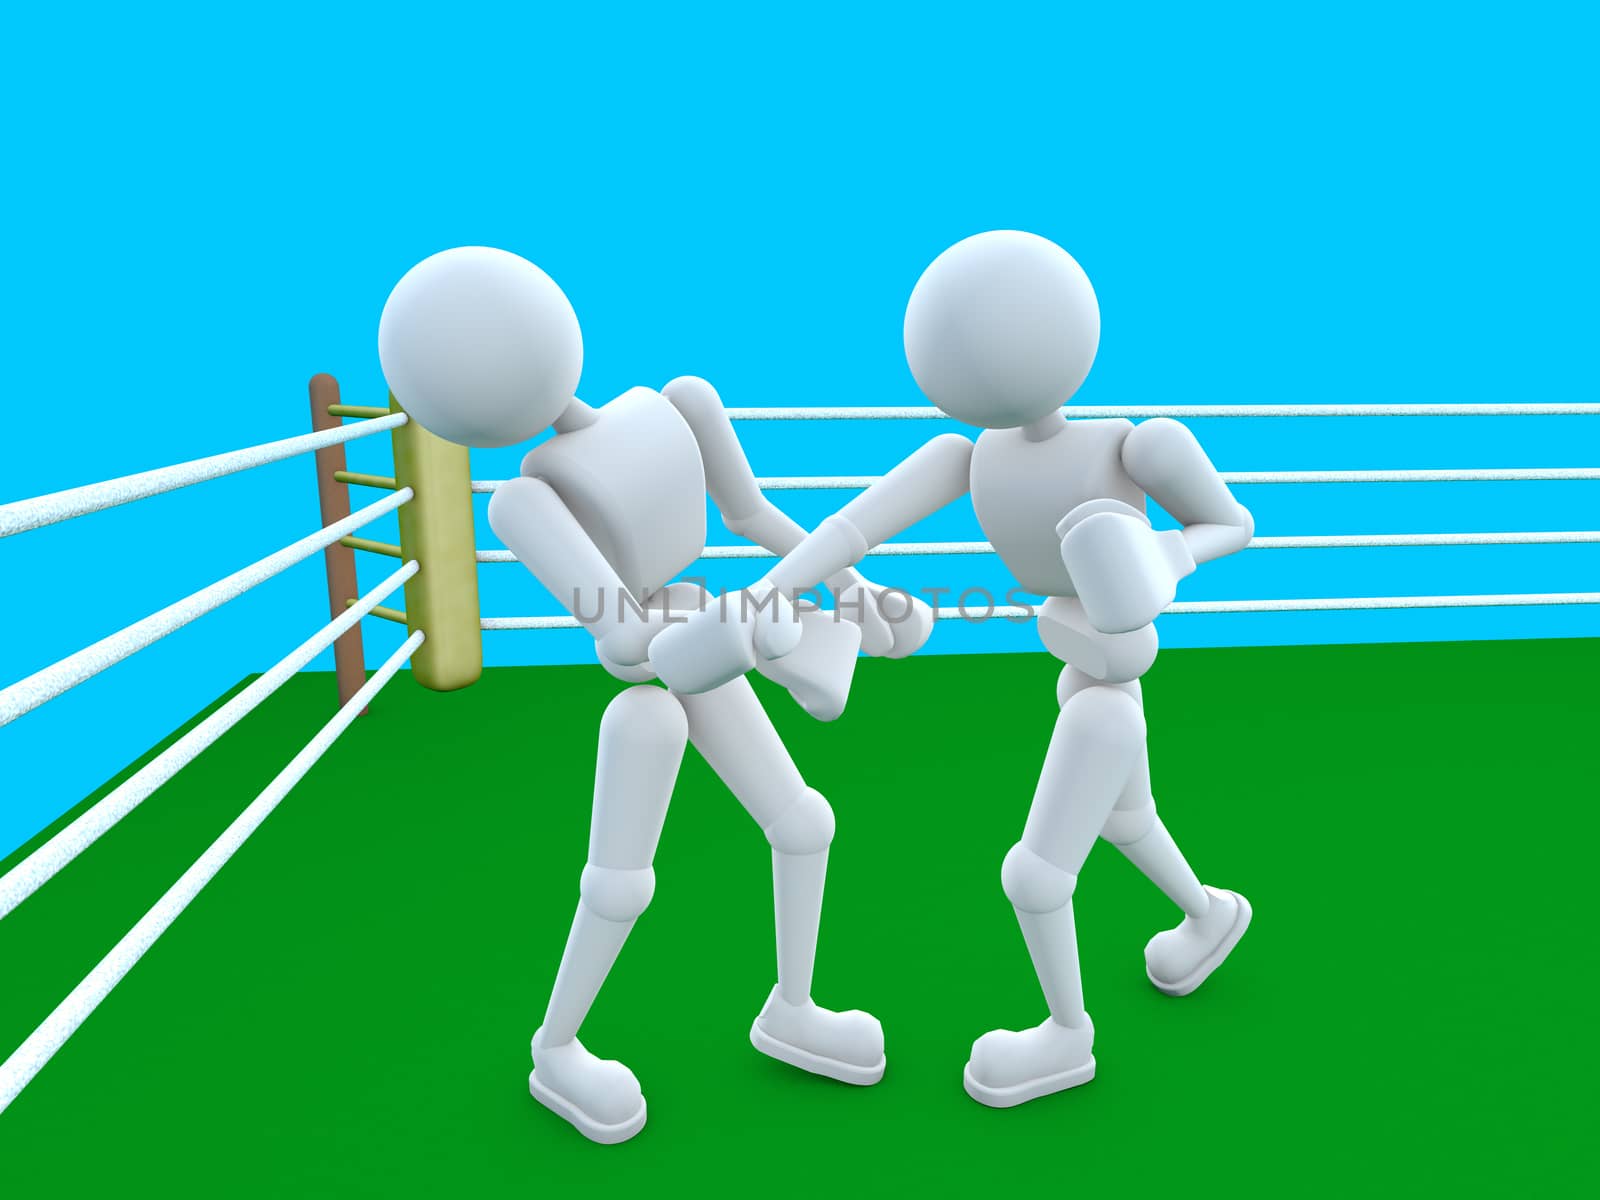 3d - illustration person in the boxing ring carried the fight. The moment the scene after the impact.